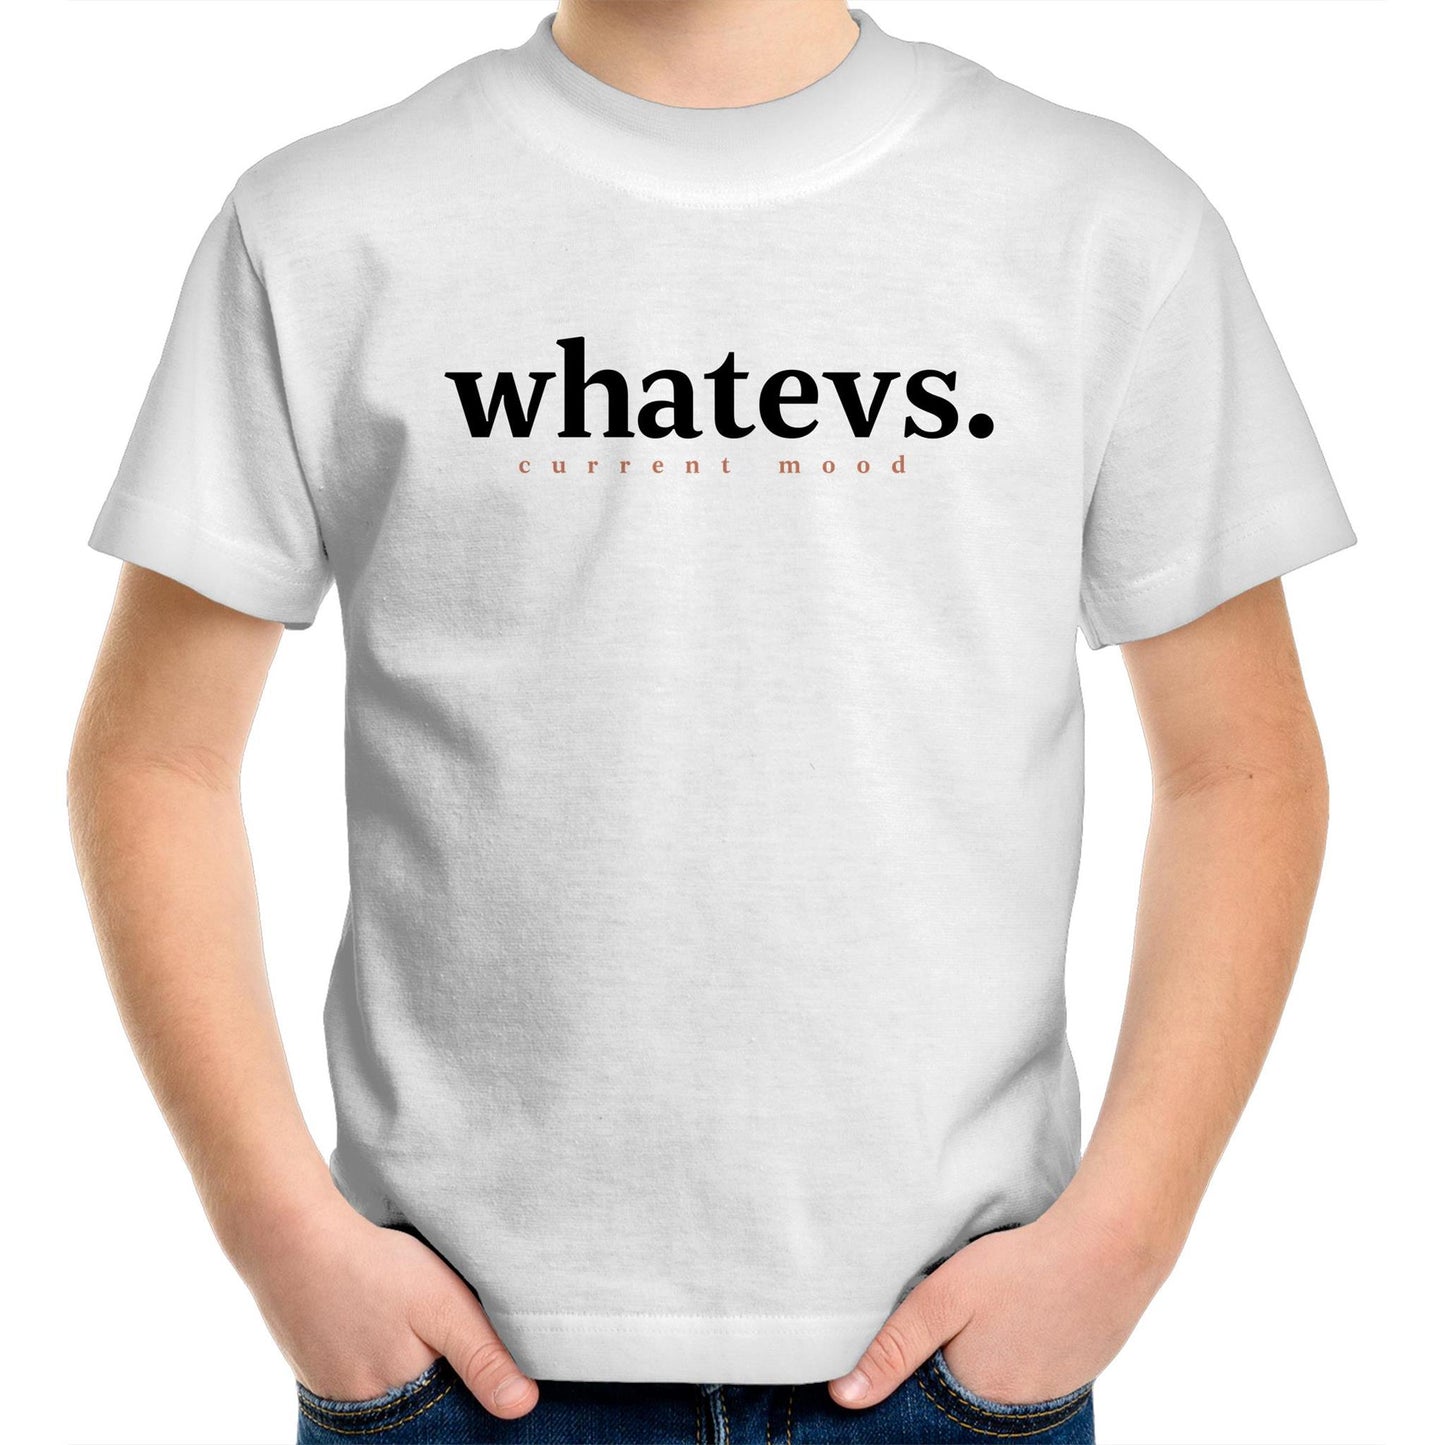 Current Mood 'WHATEVS.' Youth Tee